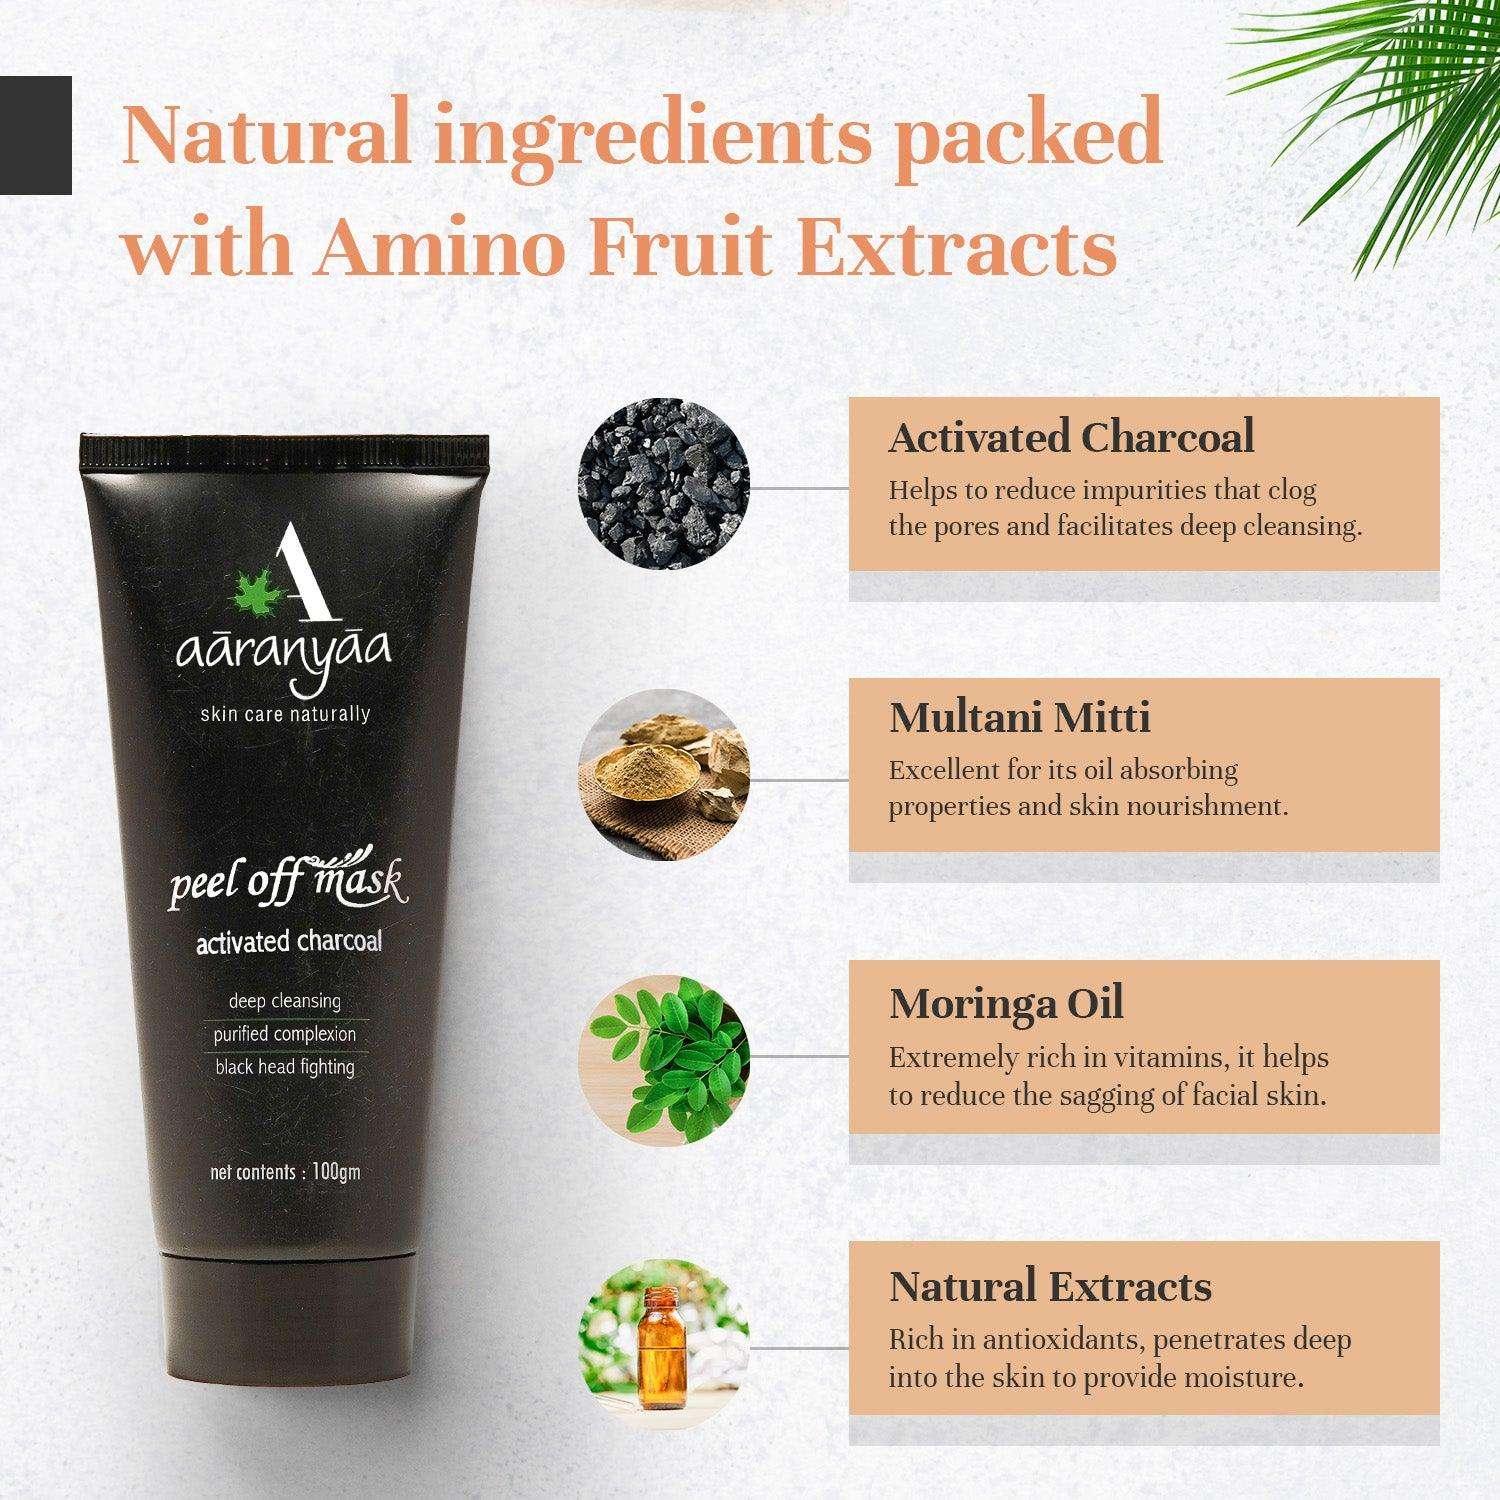 Peel Off Mask With Activated Charcoal - aaranyaa skincare